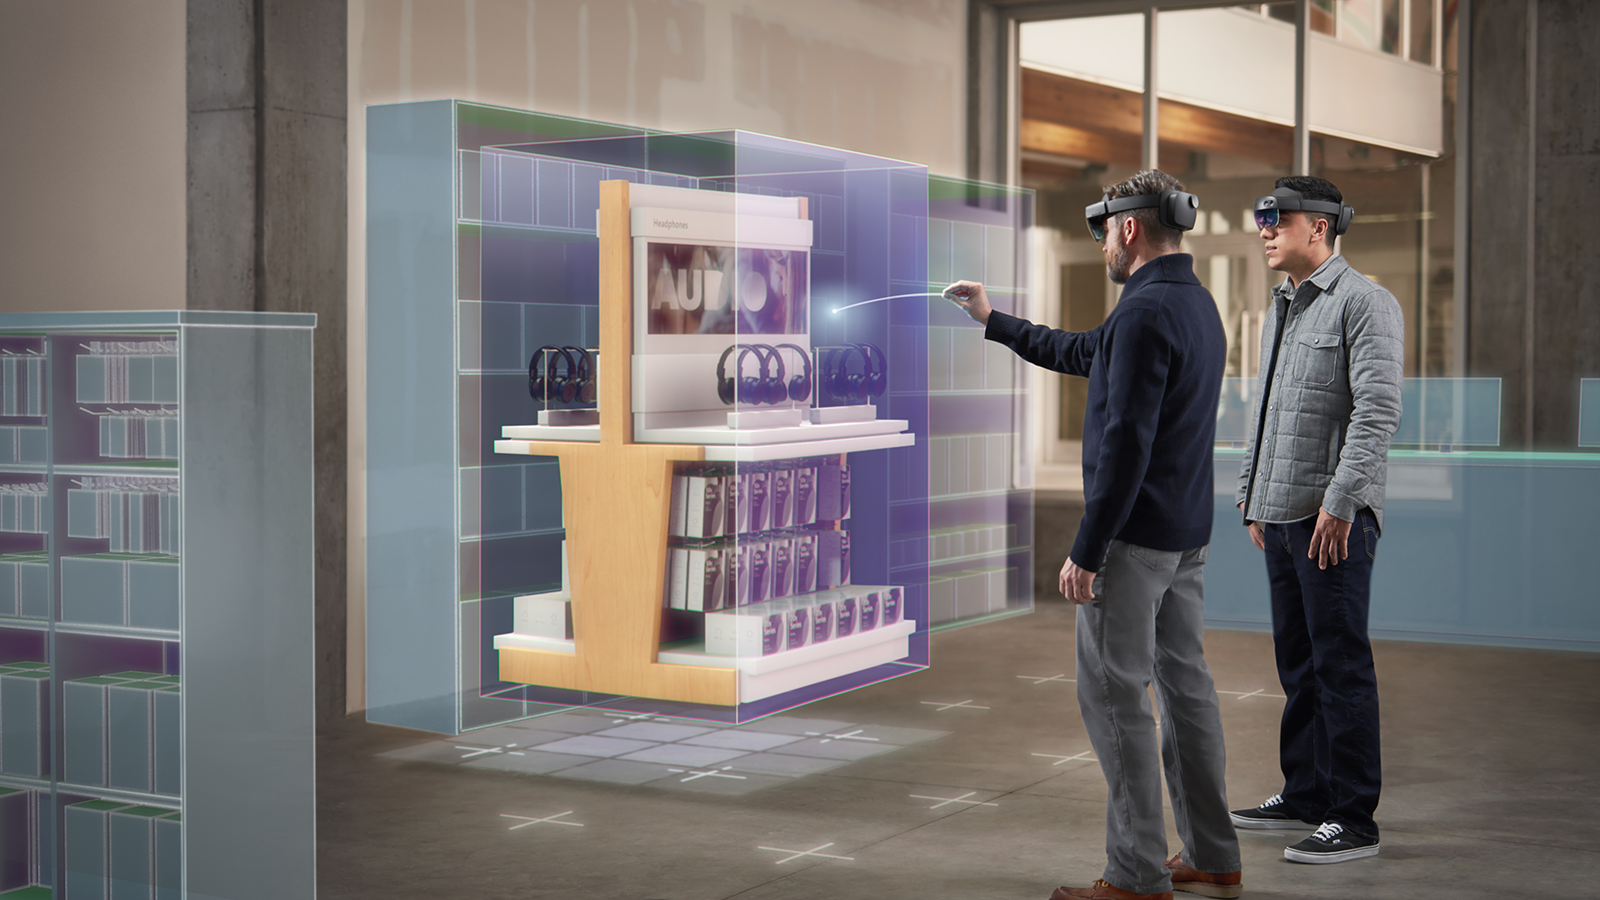 Photograph of two users wearing HoloLens headsets and interacting with a stationary hologram.